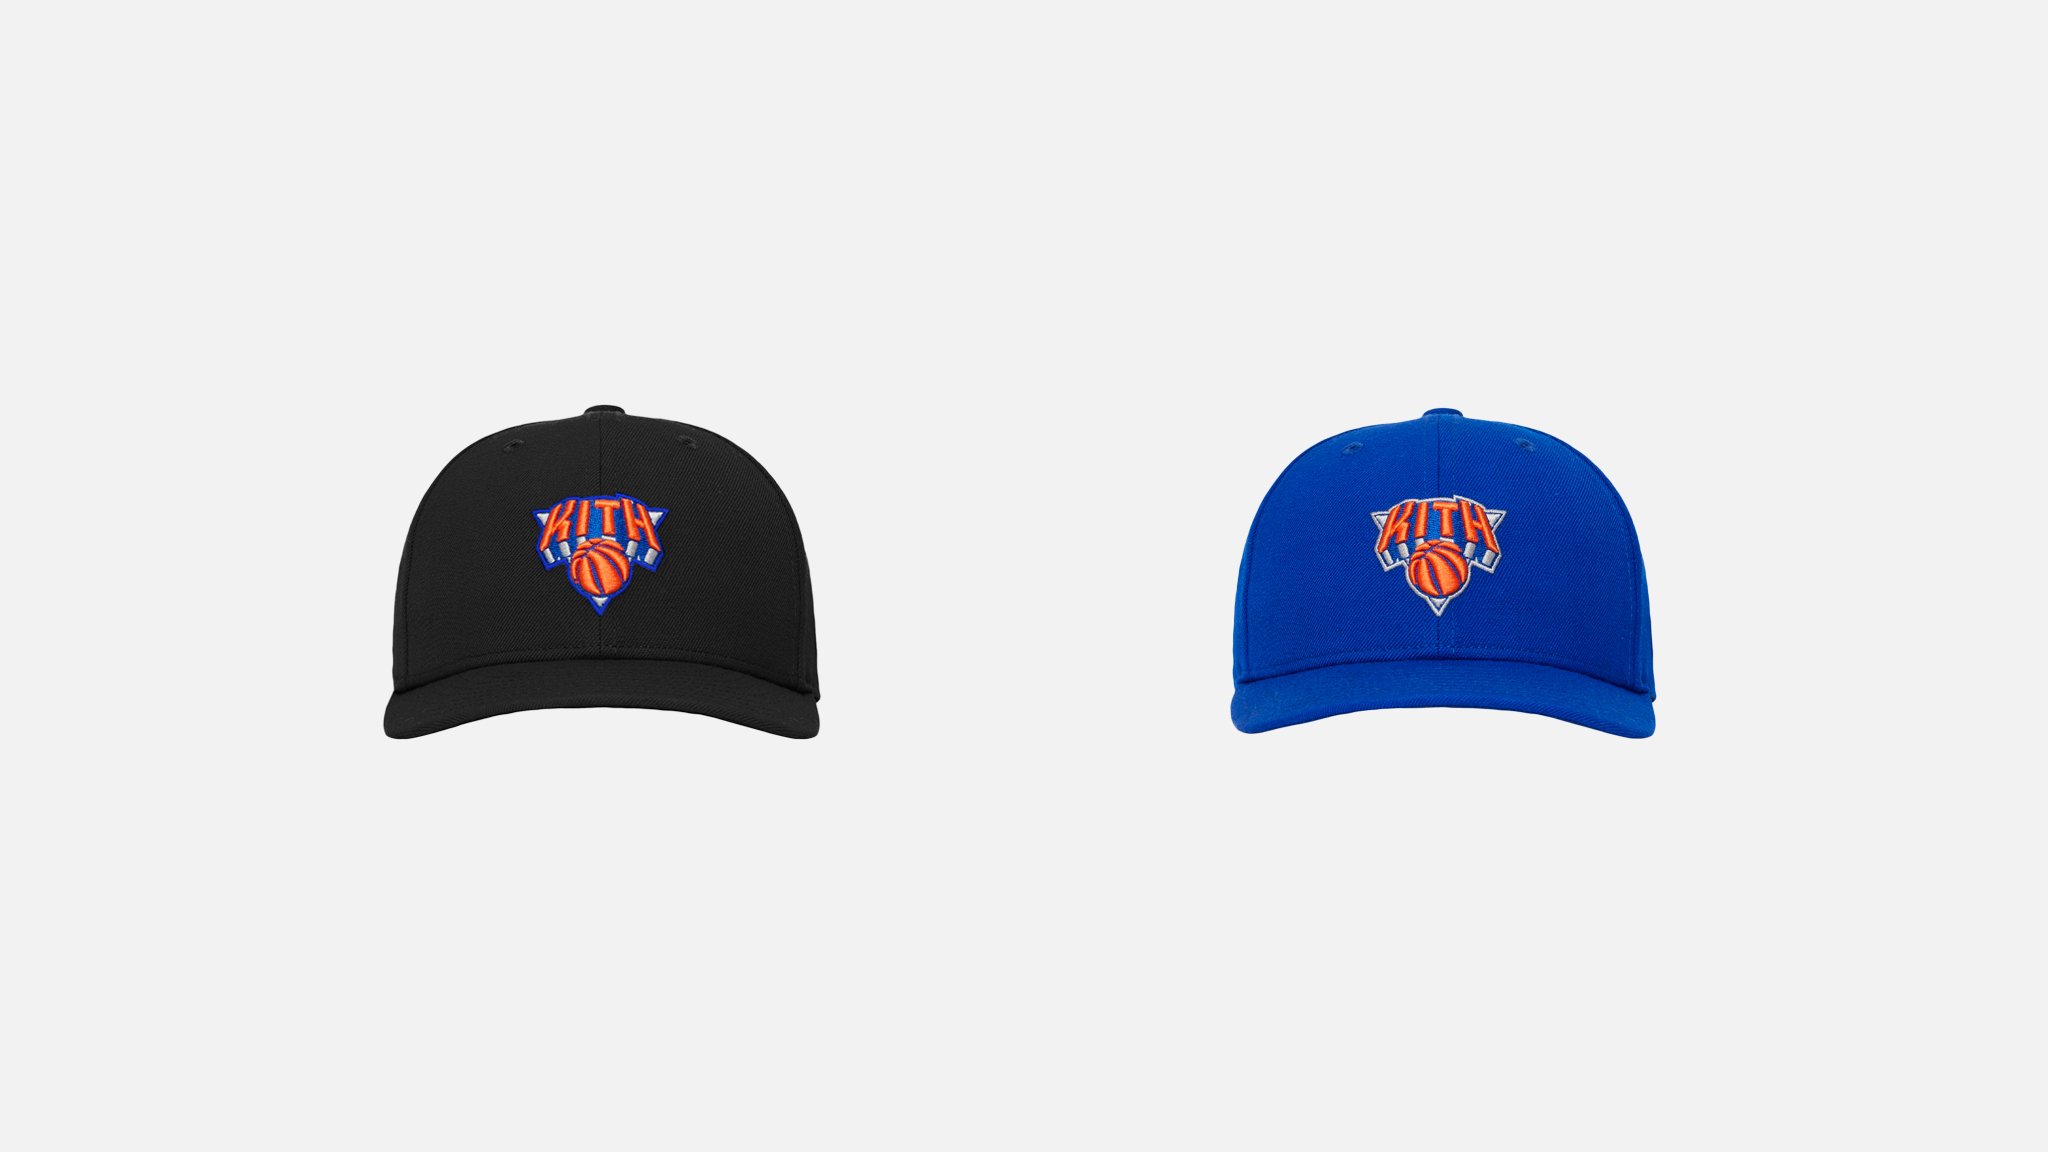 Kith x Nike for New York Knicks '20-'21 Collection